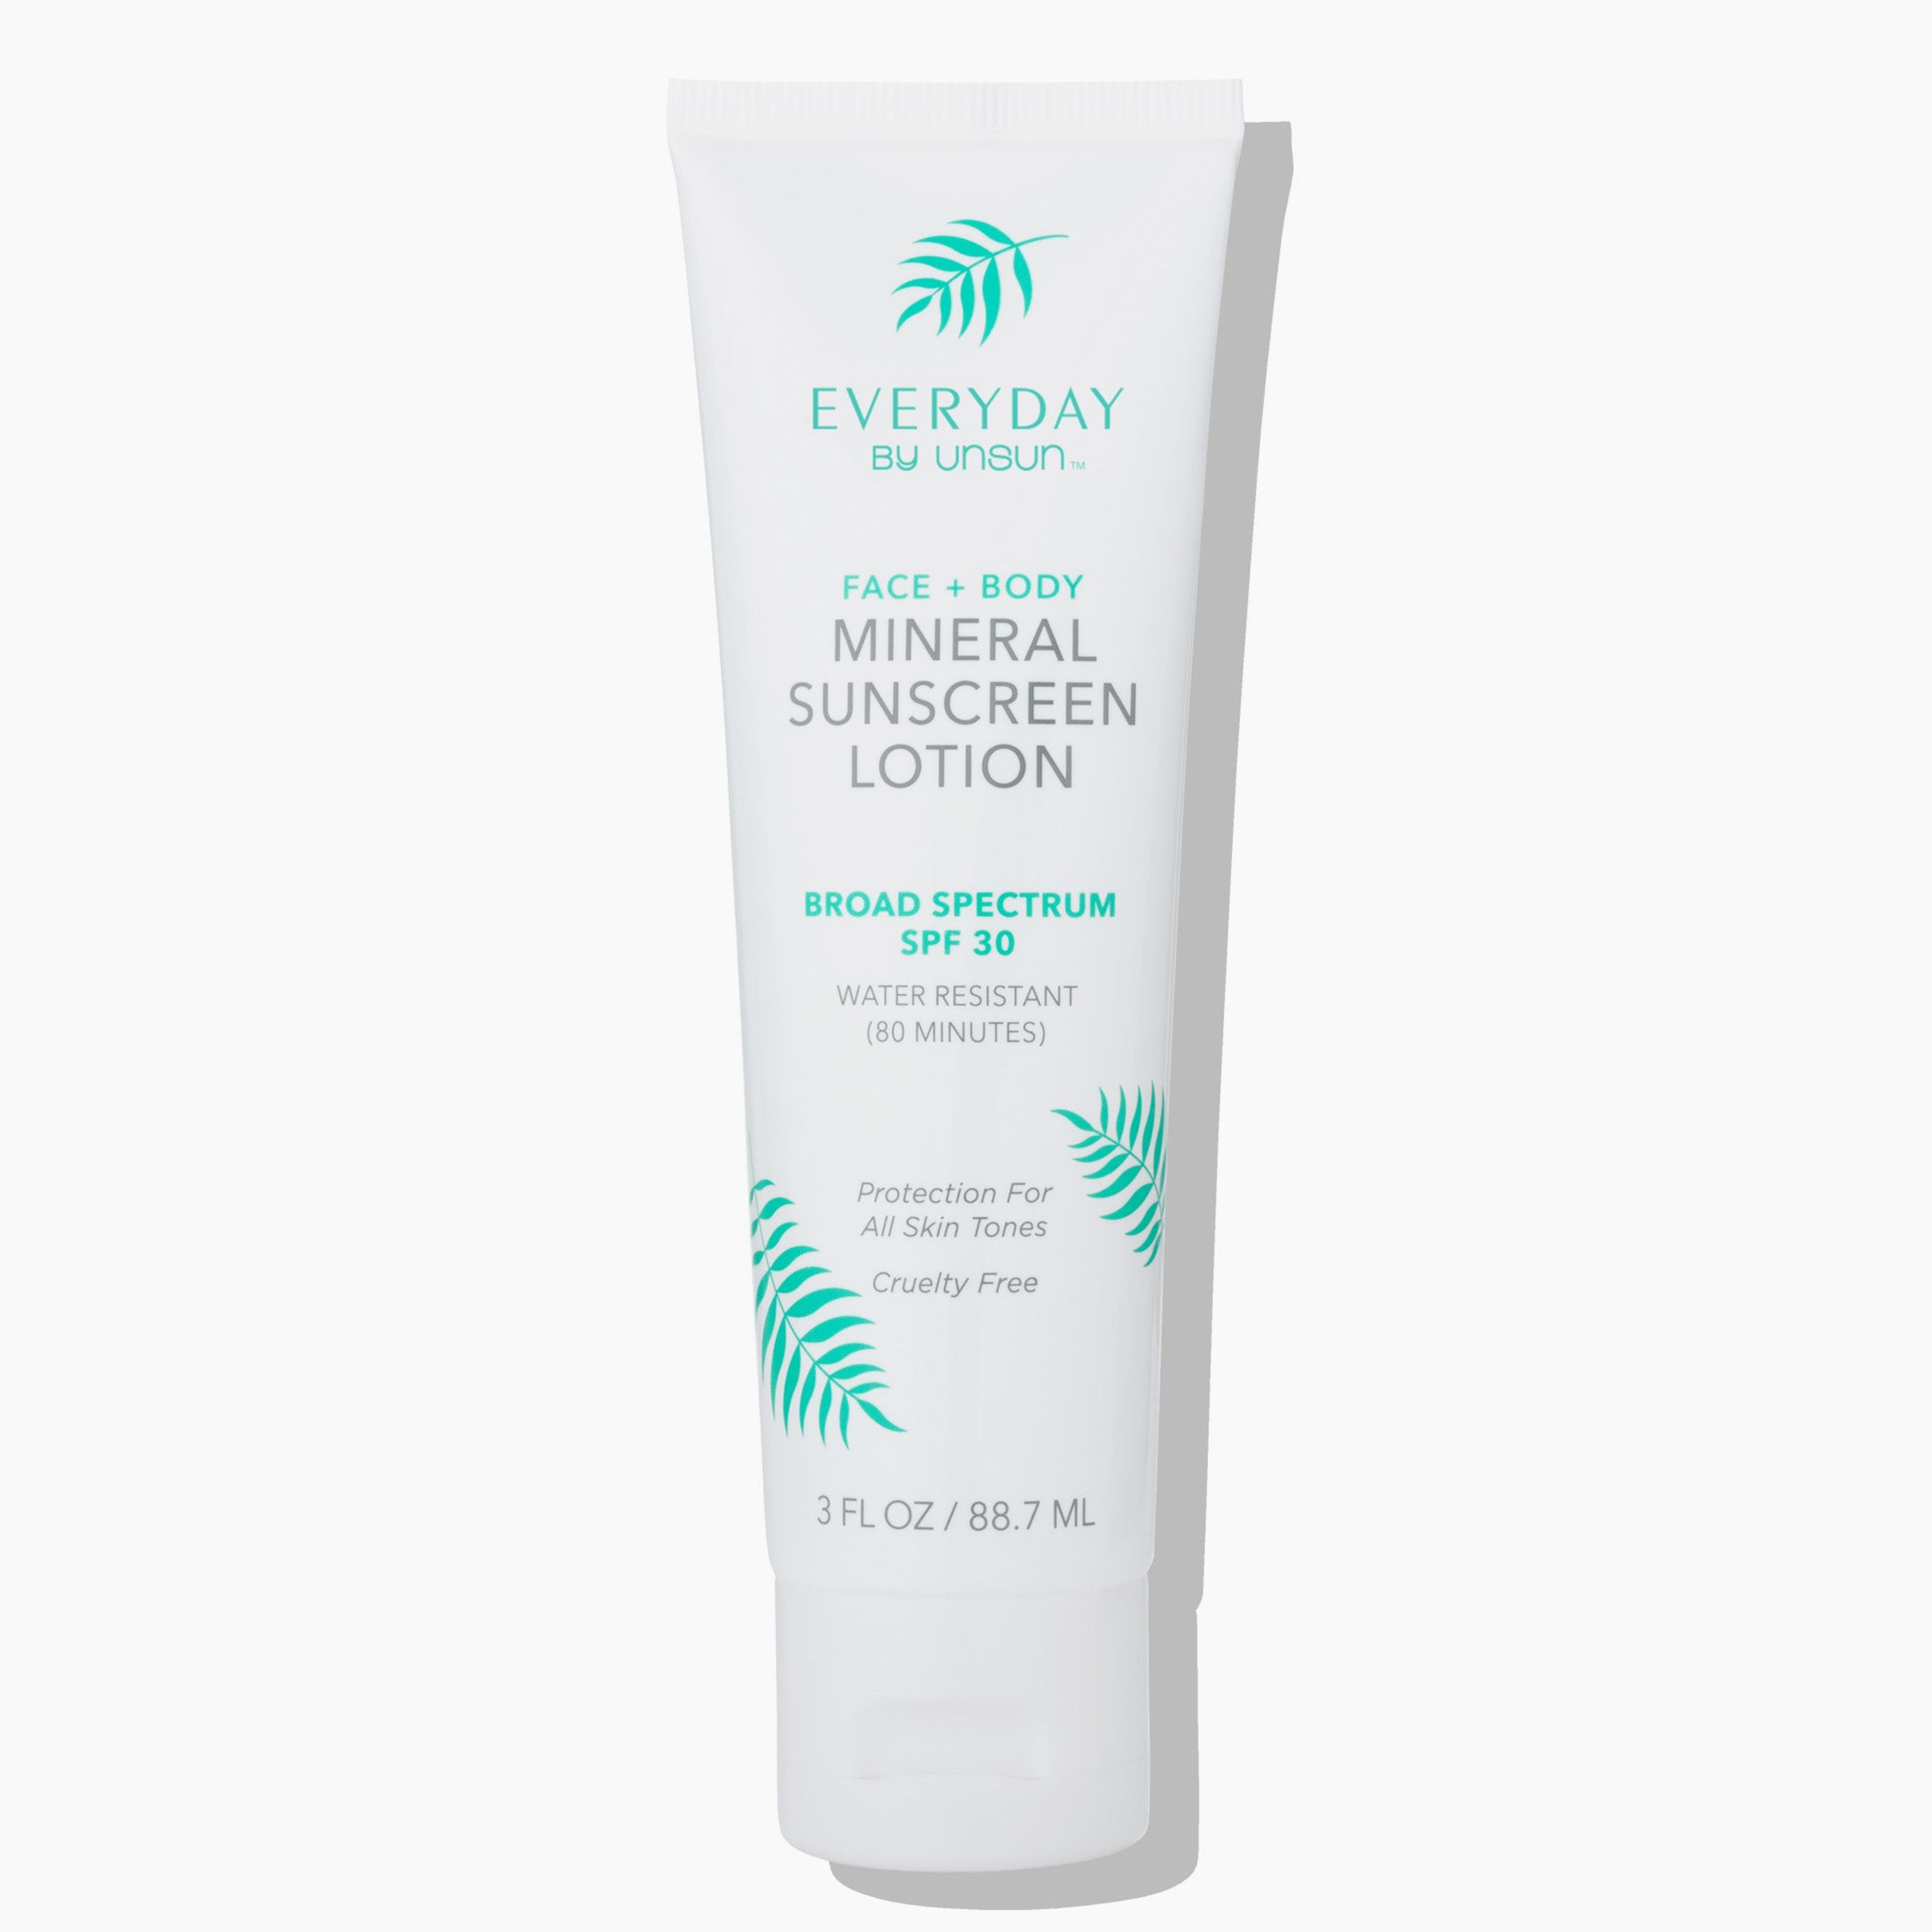 EVERYDAY Face + Body Mineral SPF30 Lotion